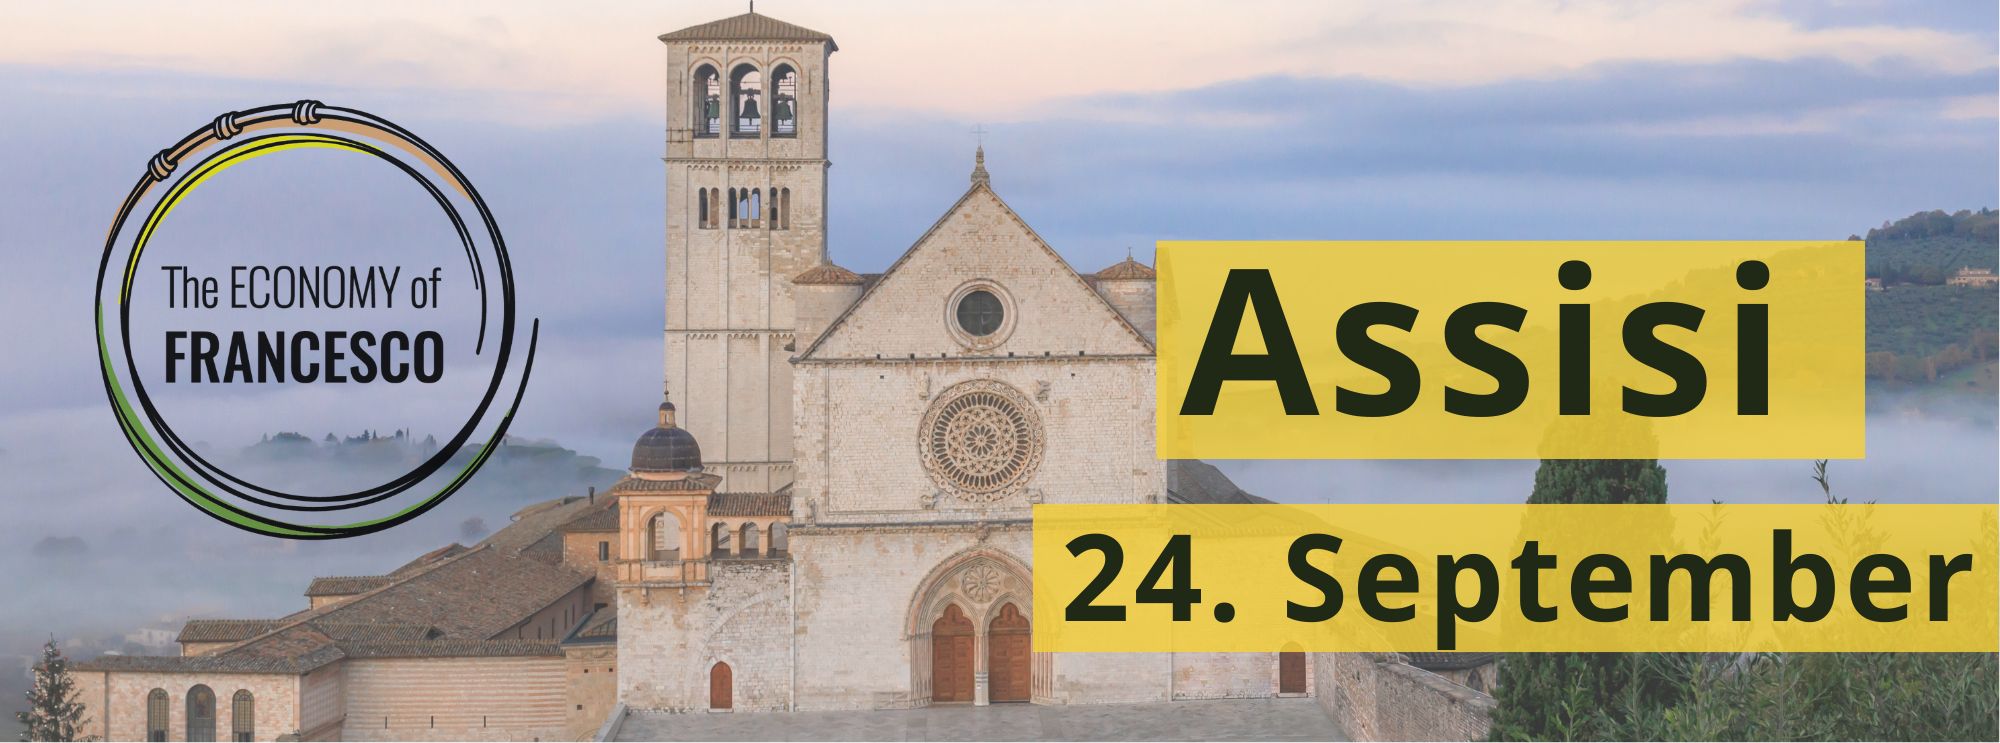 Visit of the Holy Father Francis to Assisi for the 'Economy of Francesco' event [24 September 2022]